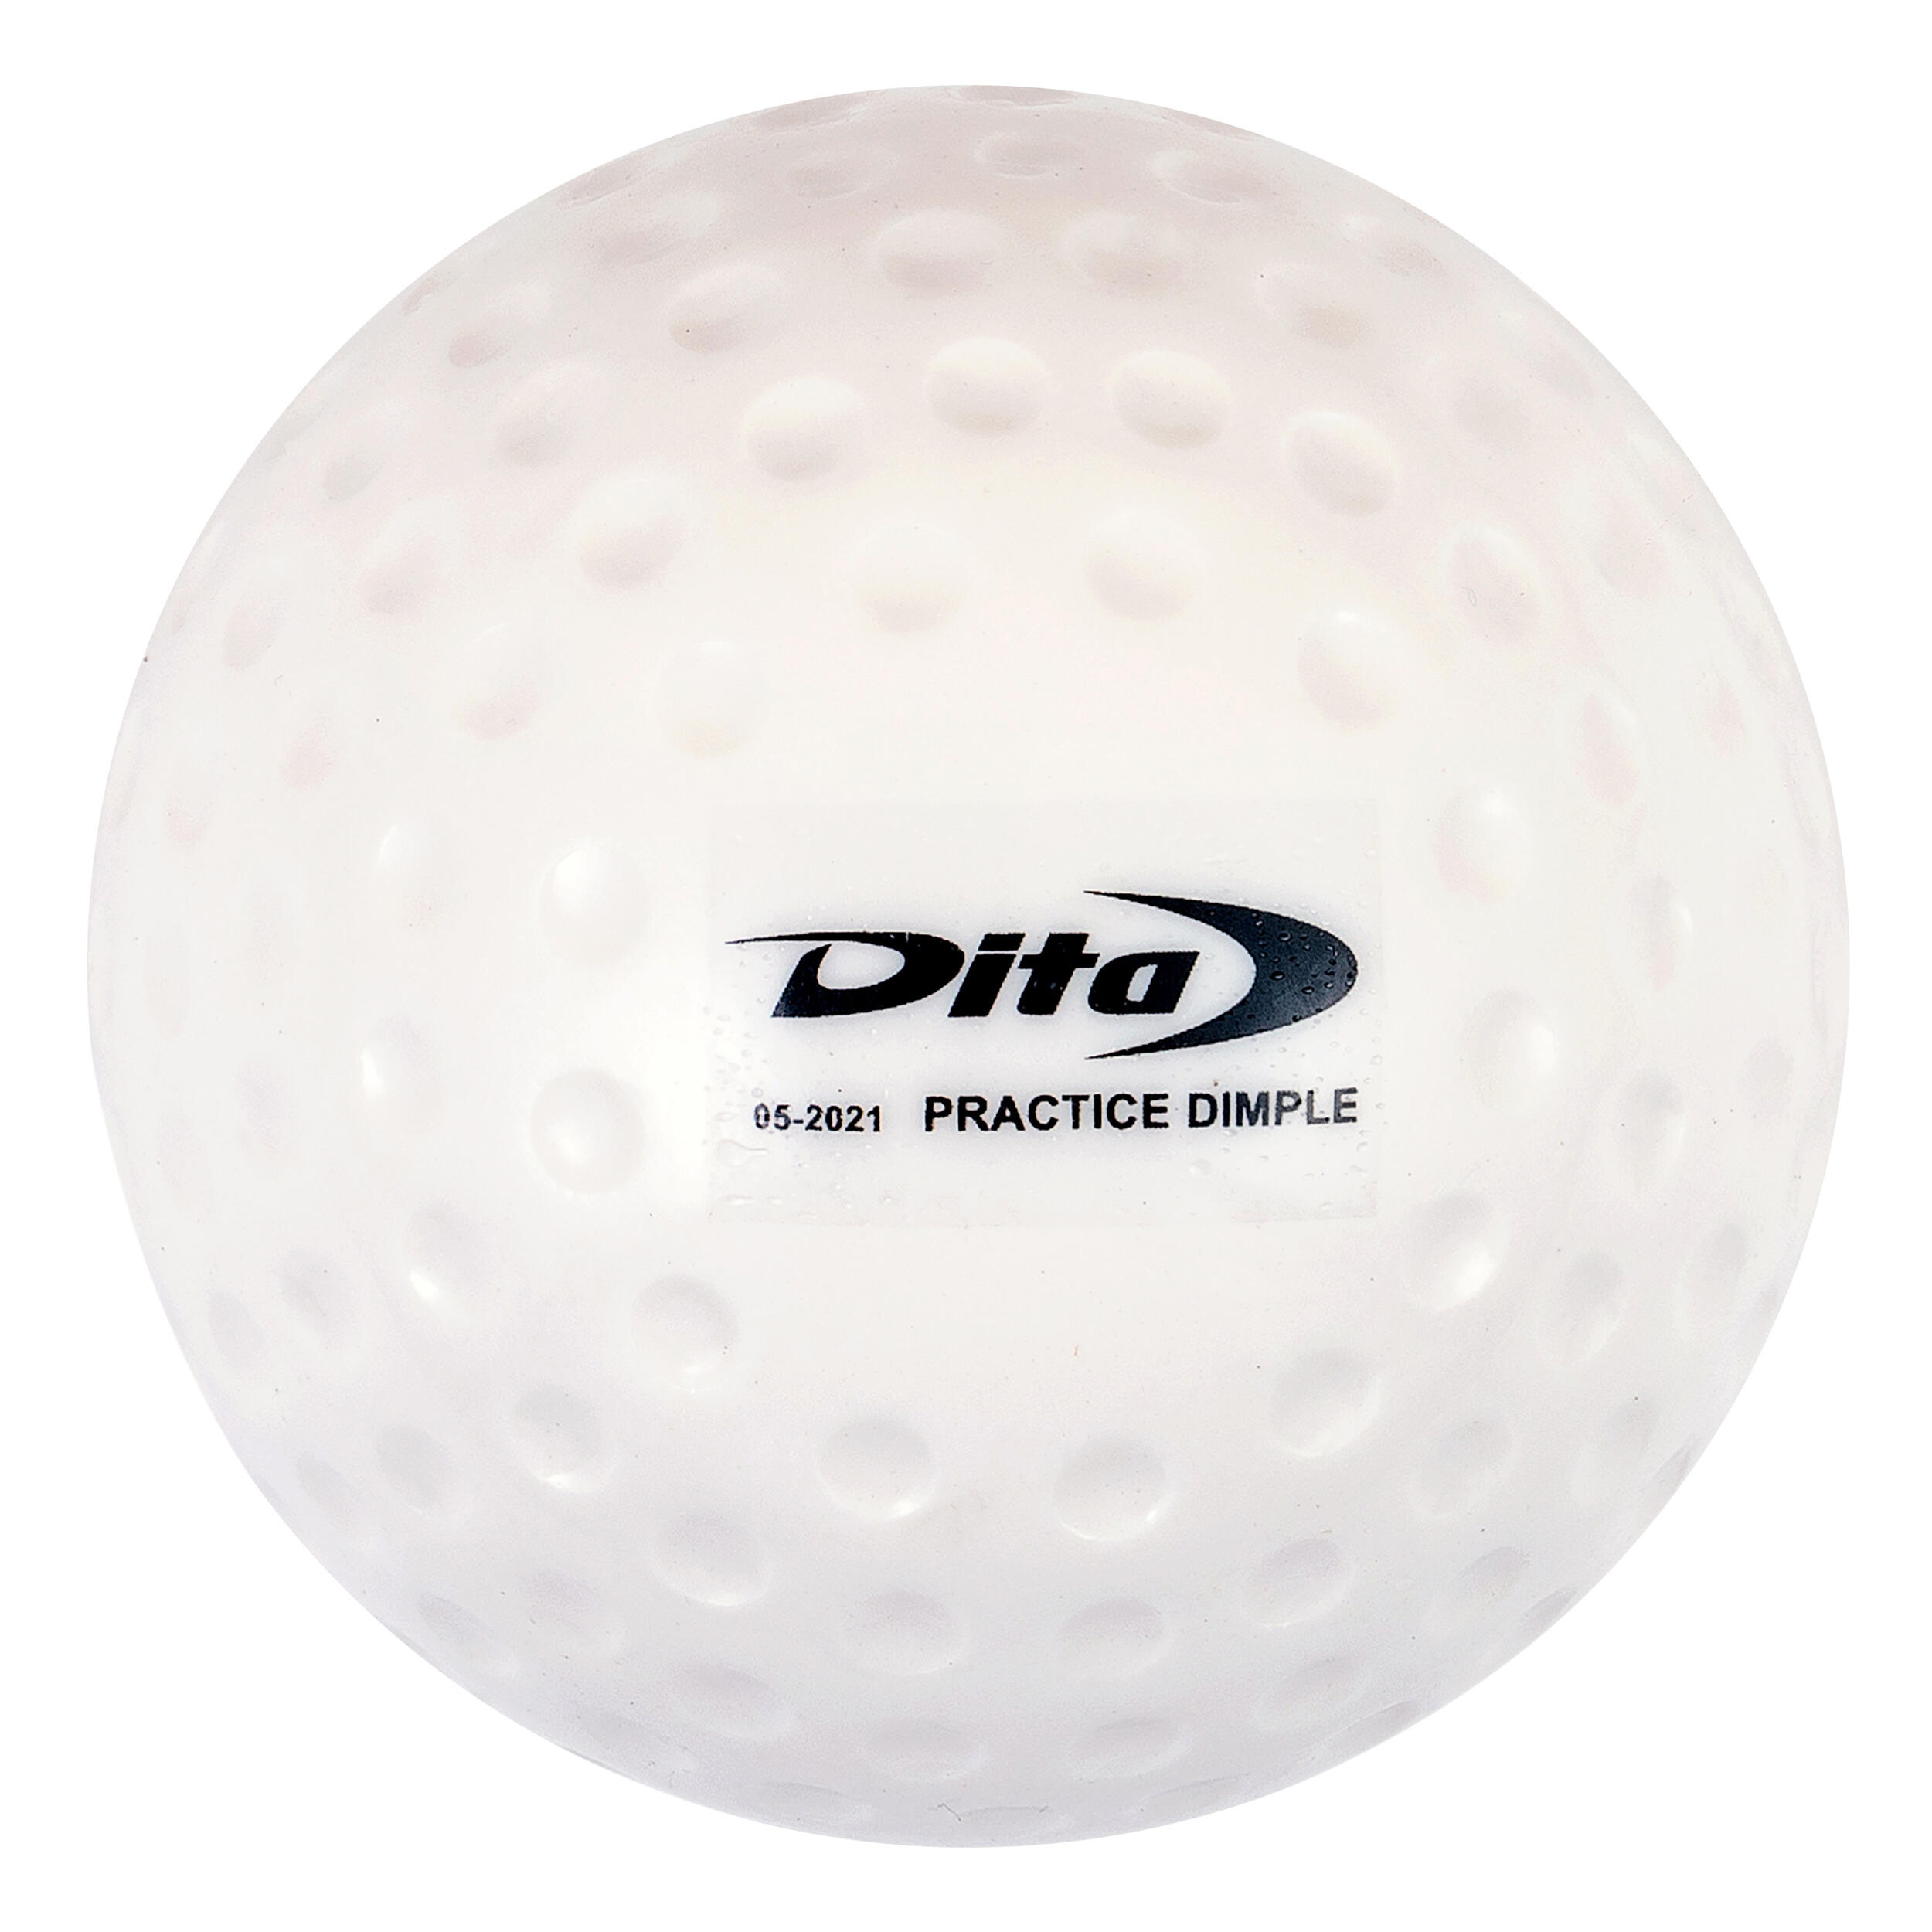 DITA Dimpled Field Hockey Ball Practice - White